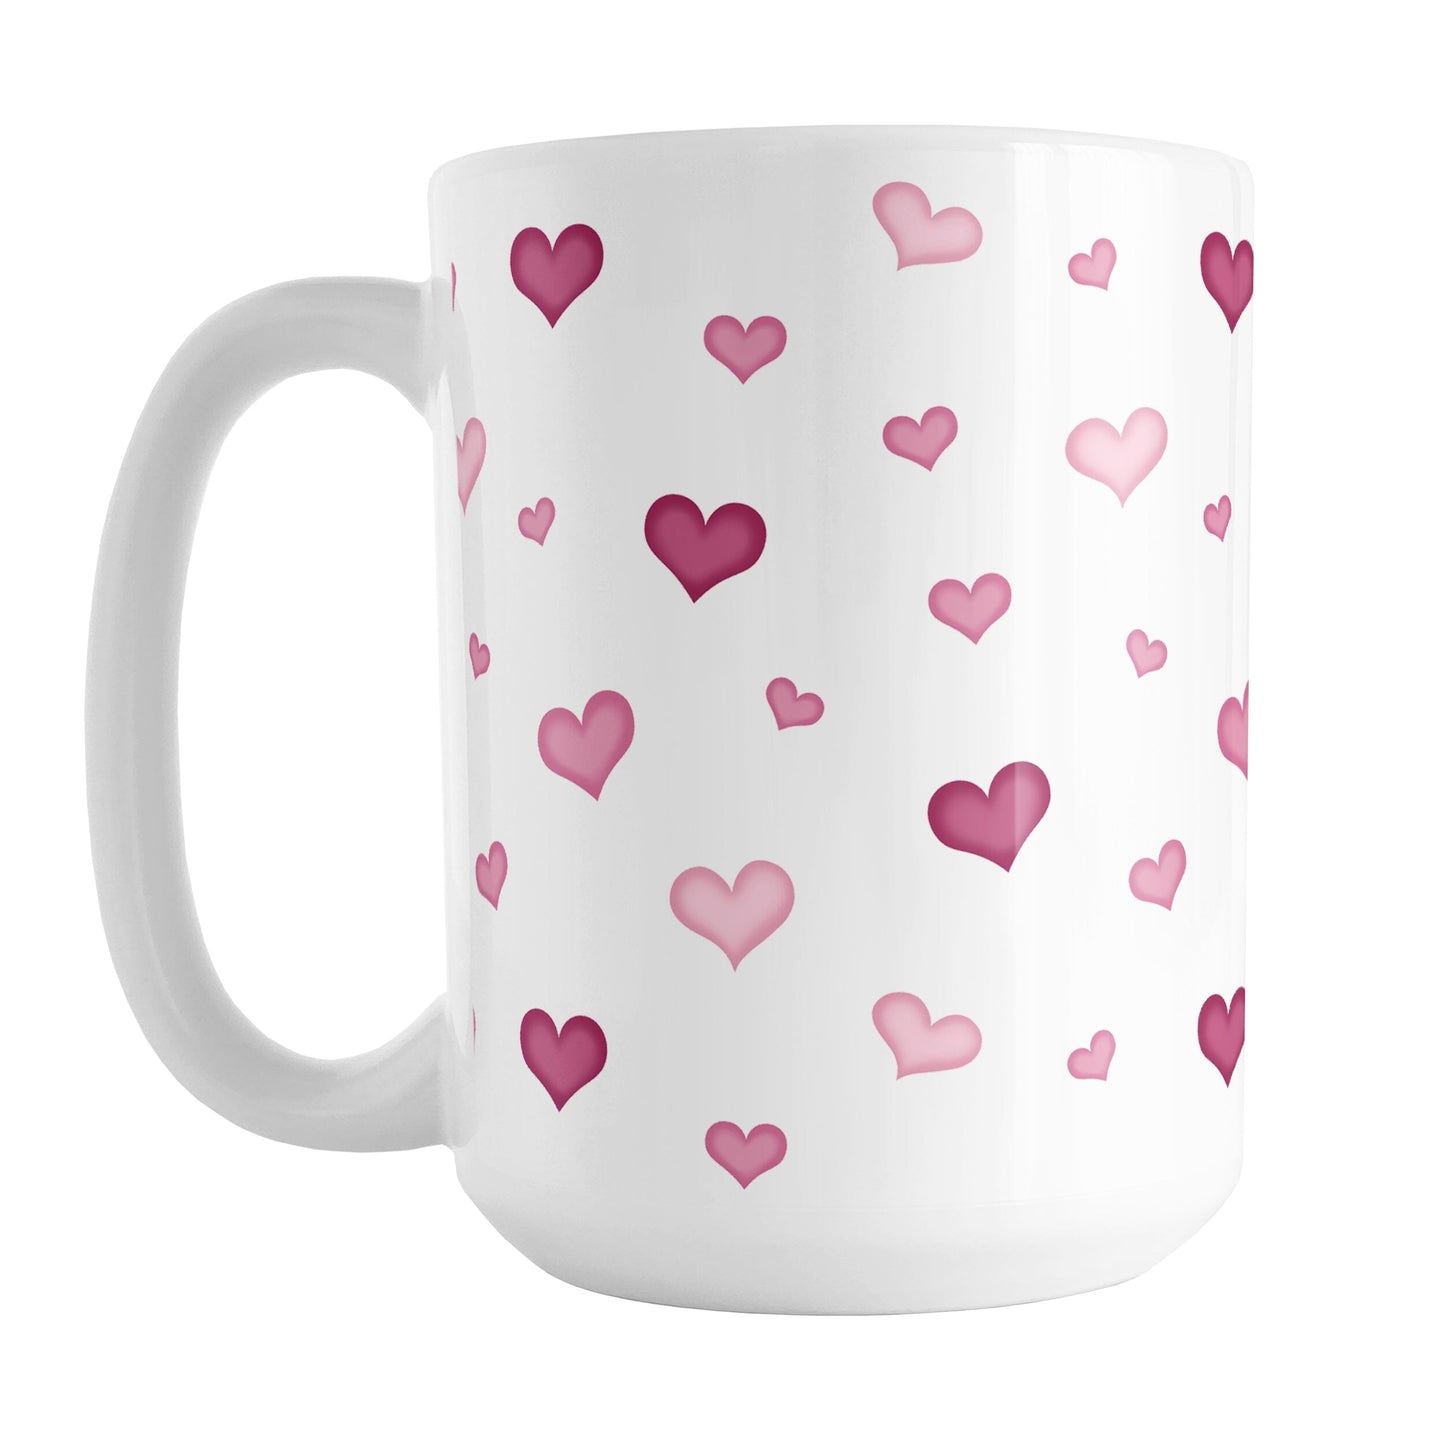 Dainty Cute Pink Hearts Mug (15oz) at Amy's Coffee Mugs. A ceramic coffee mug designed with a print of cute and dainty hand-drawn pink hearts in different shades of pink in a pattern that wraps around the mug up to the handle. 